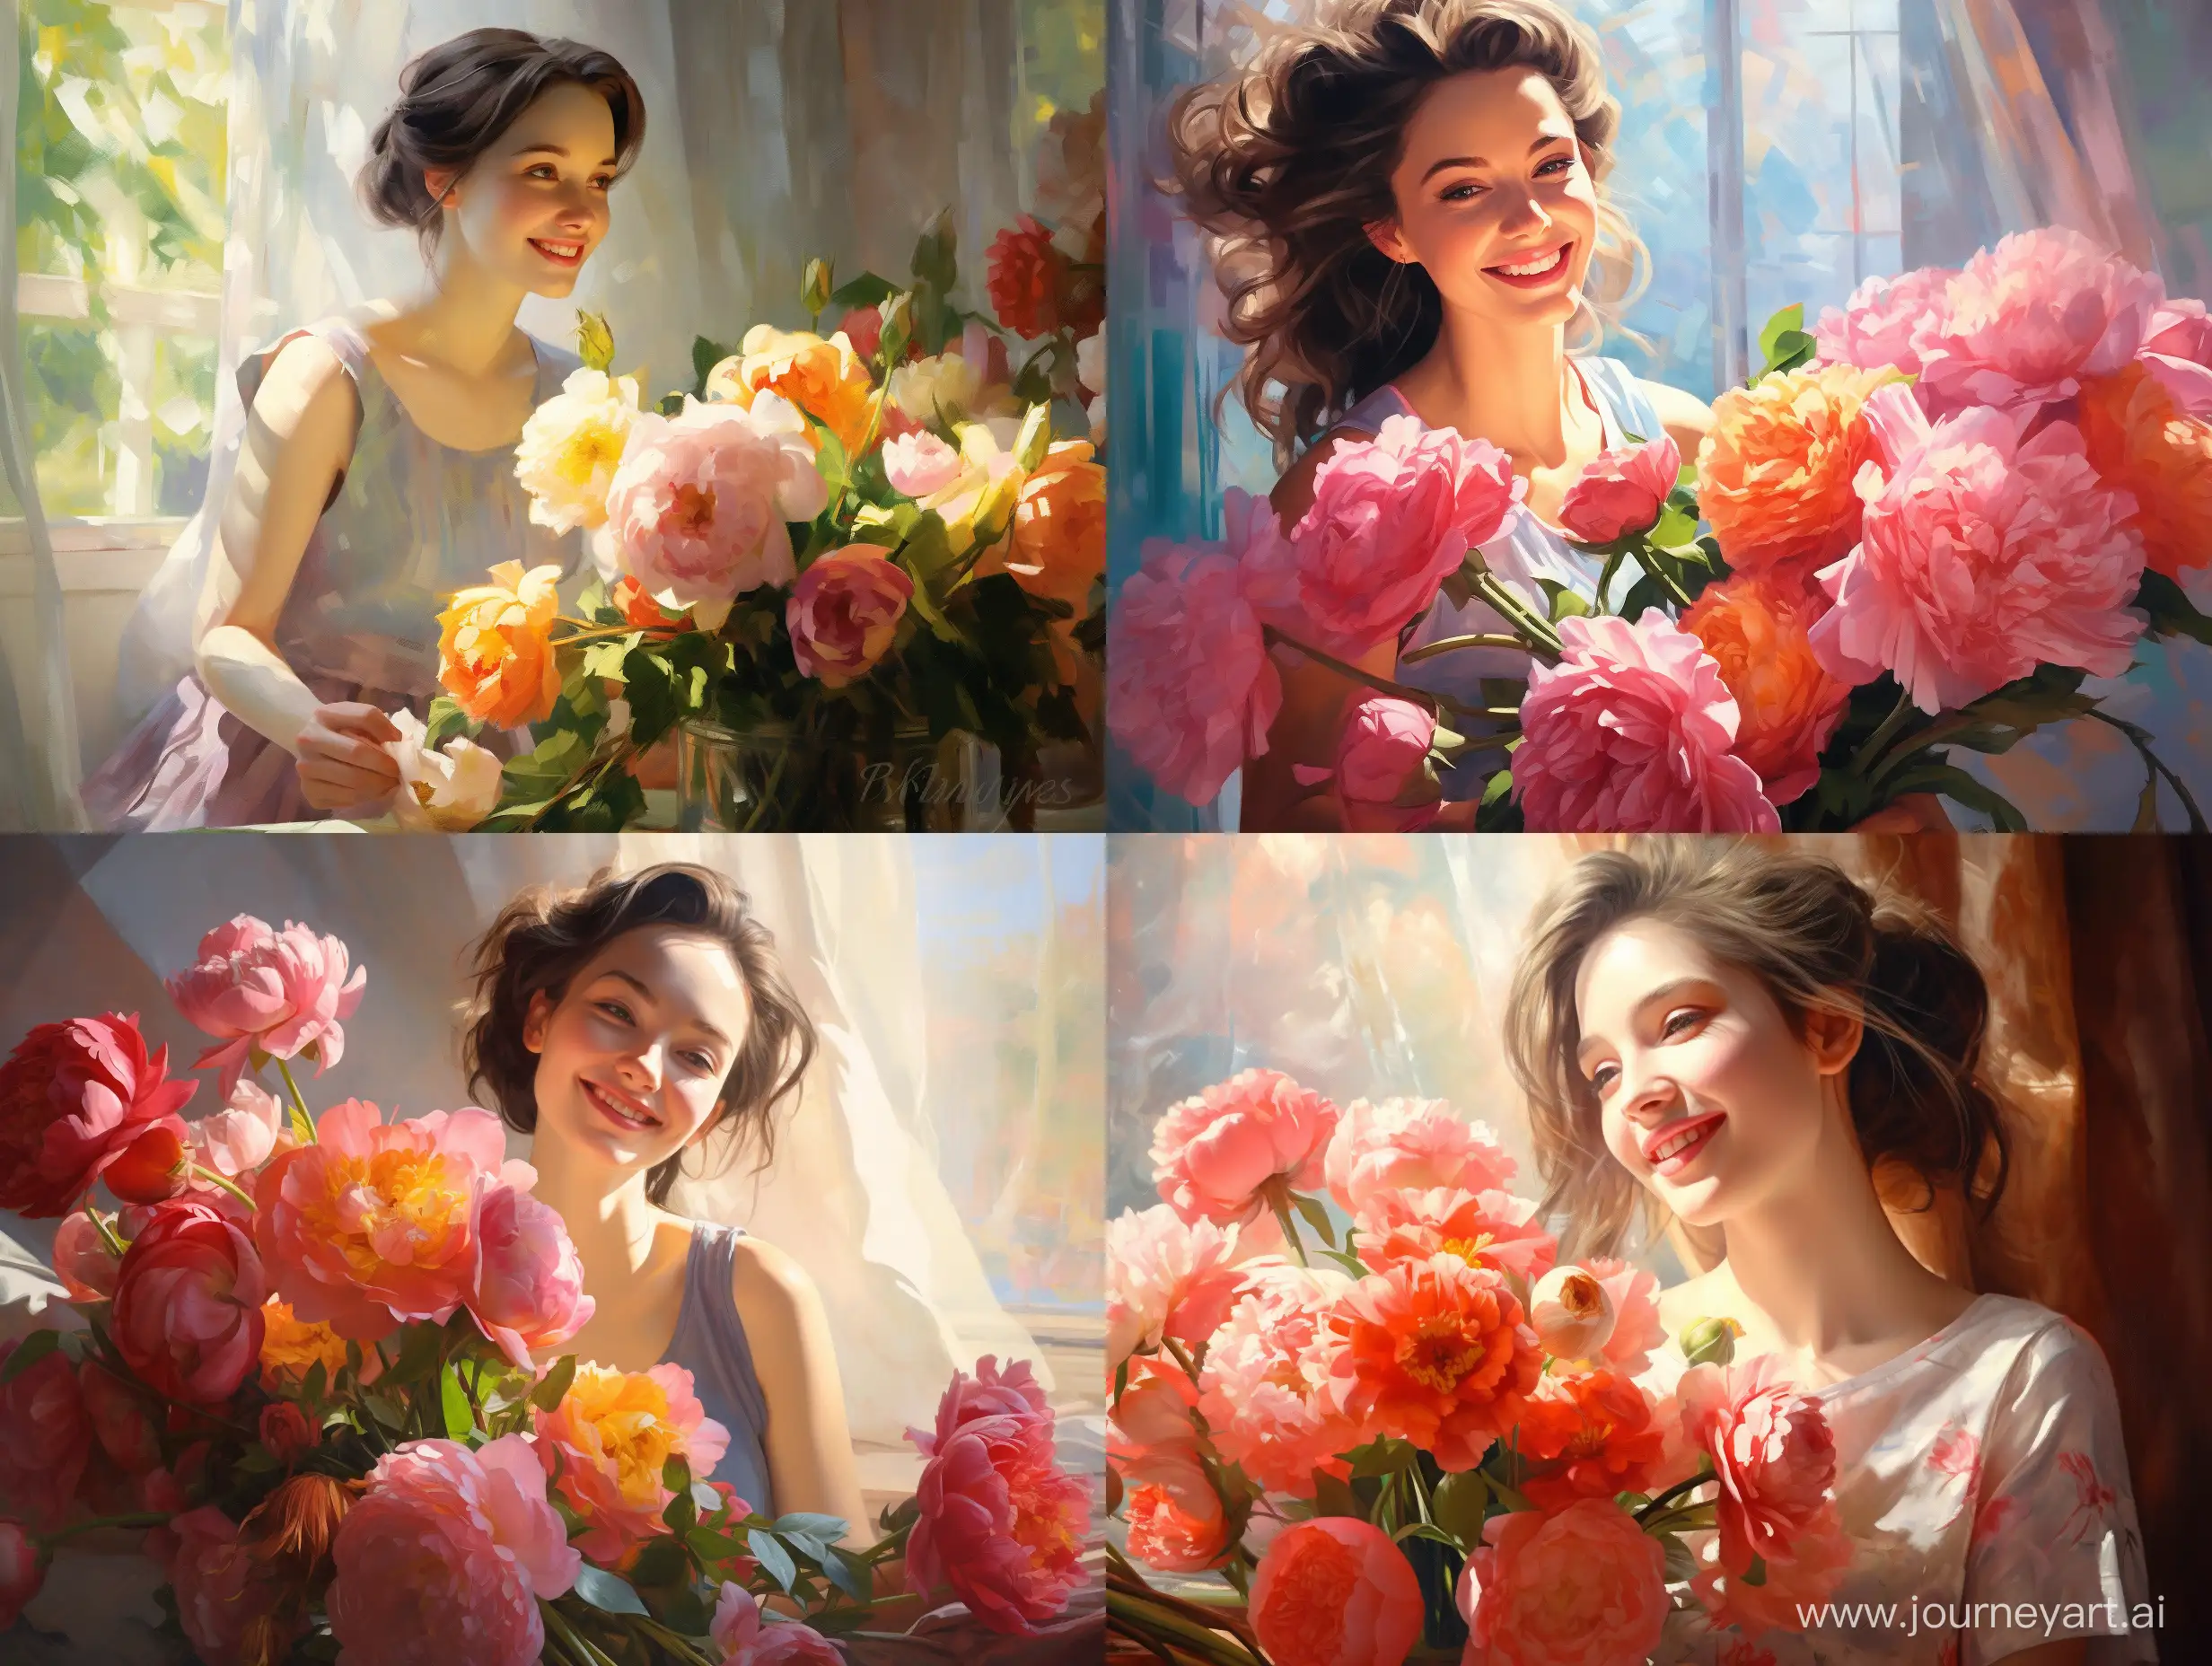 sheer happiness on a smiling womans face as she receives a bouquet of peonies and roses, bright and colourful, sunlight,